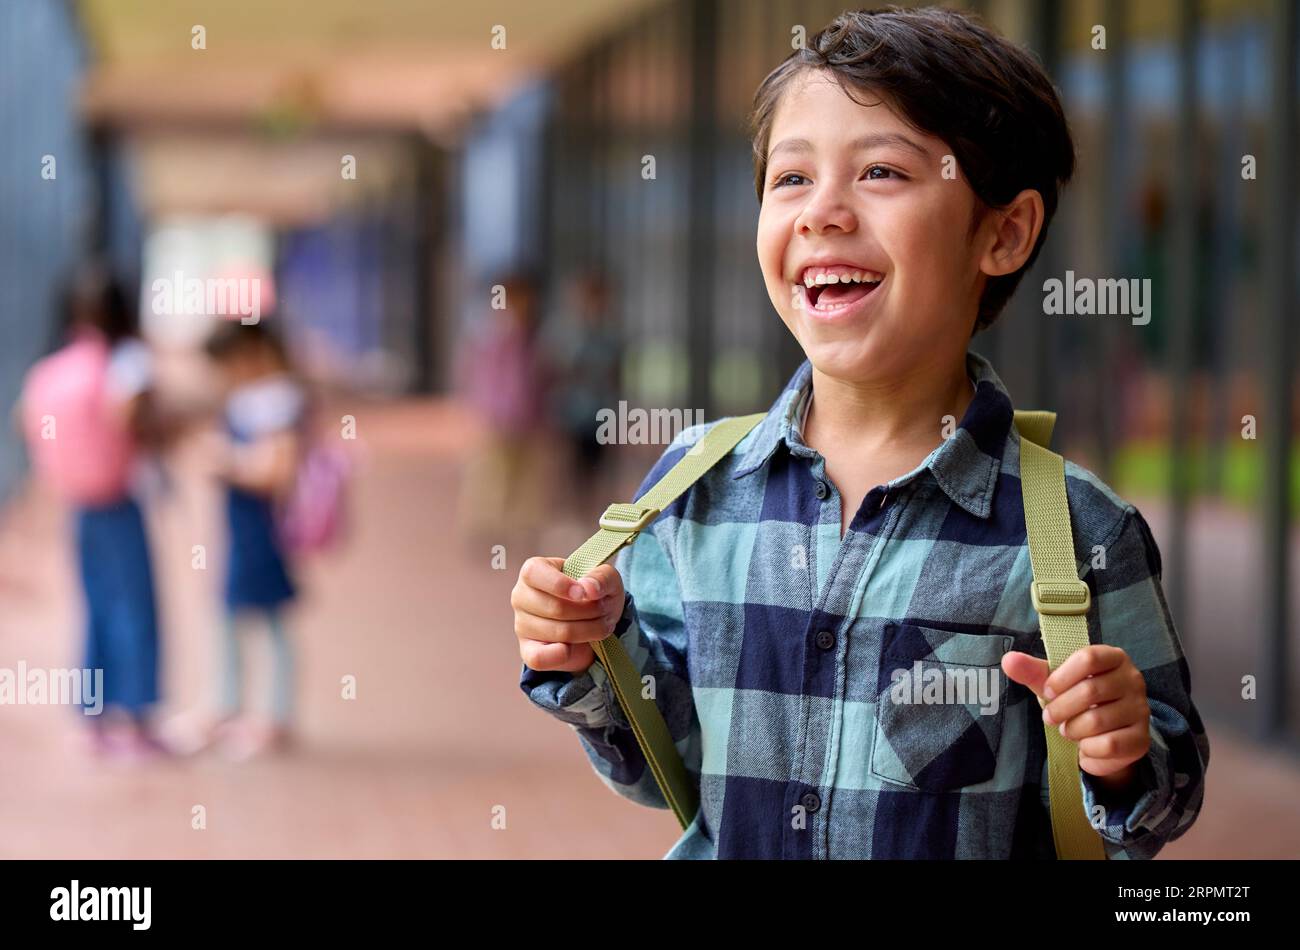 Portrait Of Smiling Male Elementary School Pupil Outdoors With Backpack At School Stock Photo